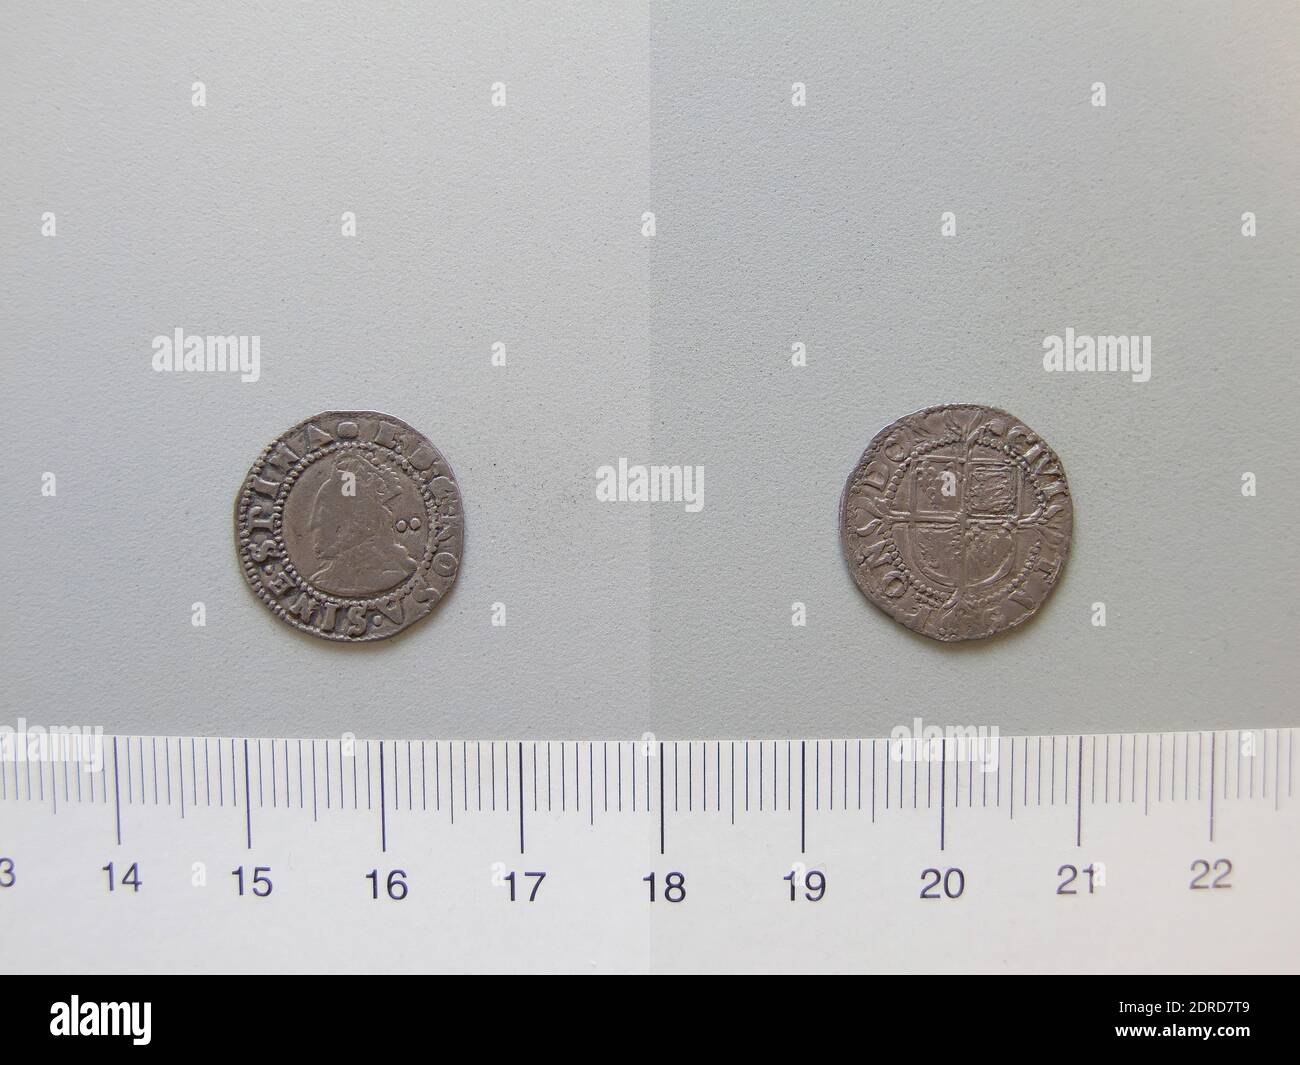 Ruler: Elizabeth I, Queen of England, British, 1533–1603, ruled 1558–1603, Mint: London, Halfgroat of Elizabeth I, Queen of England from London, Silver, 1.01 g, 2:00, 17 mm, Made in London, England, British, 16th century, Numismatics Stock Photo